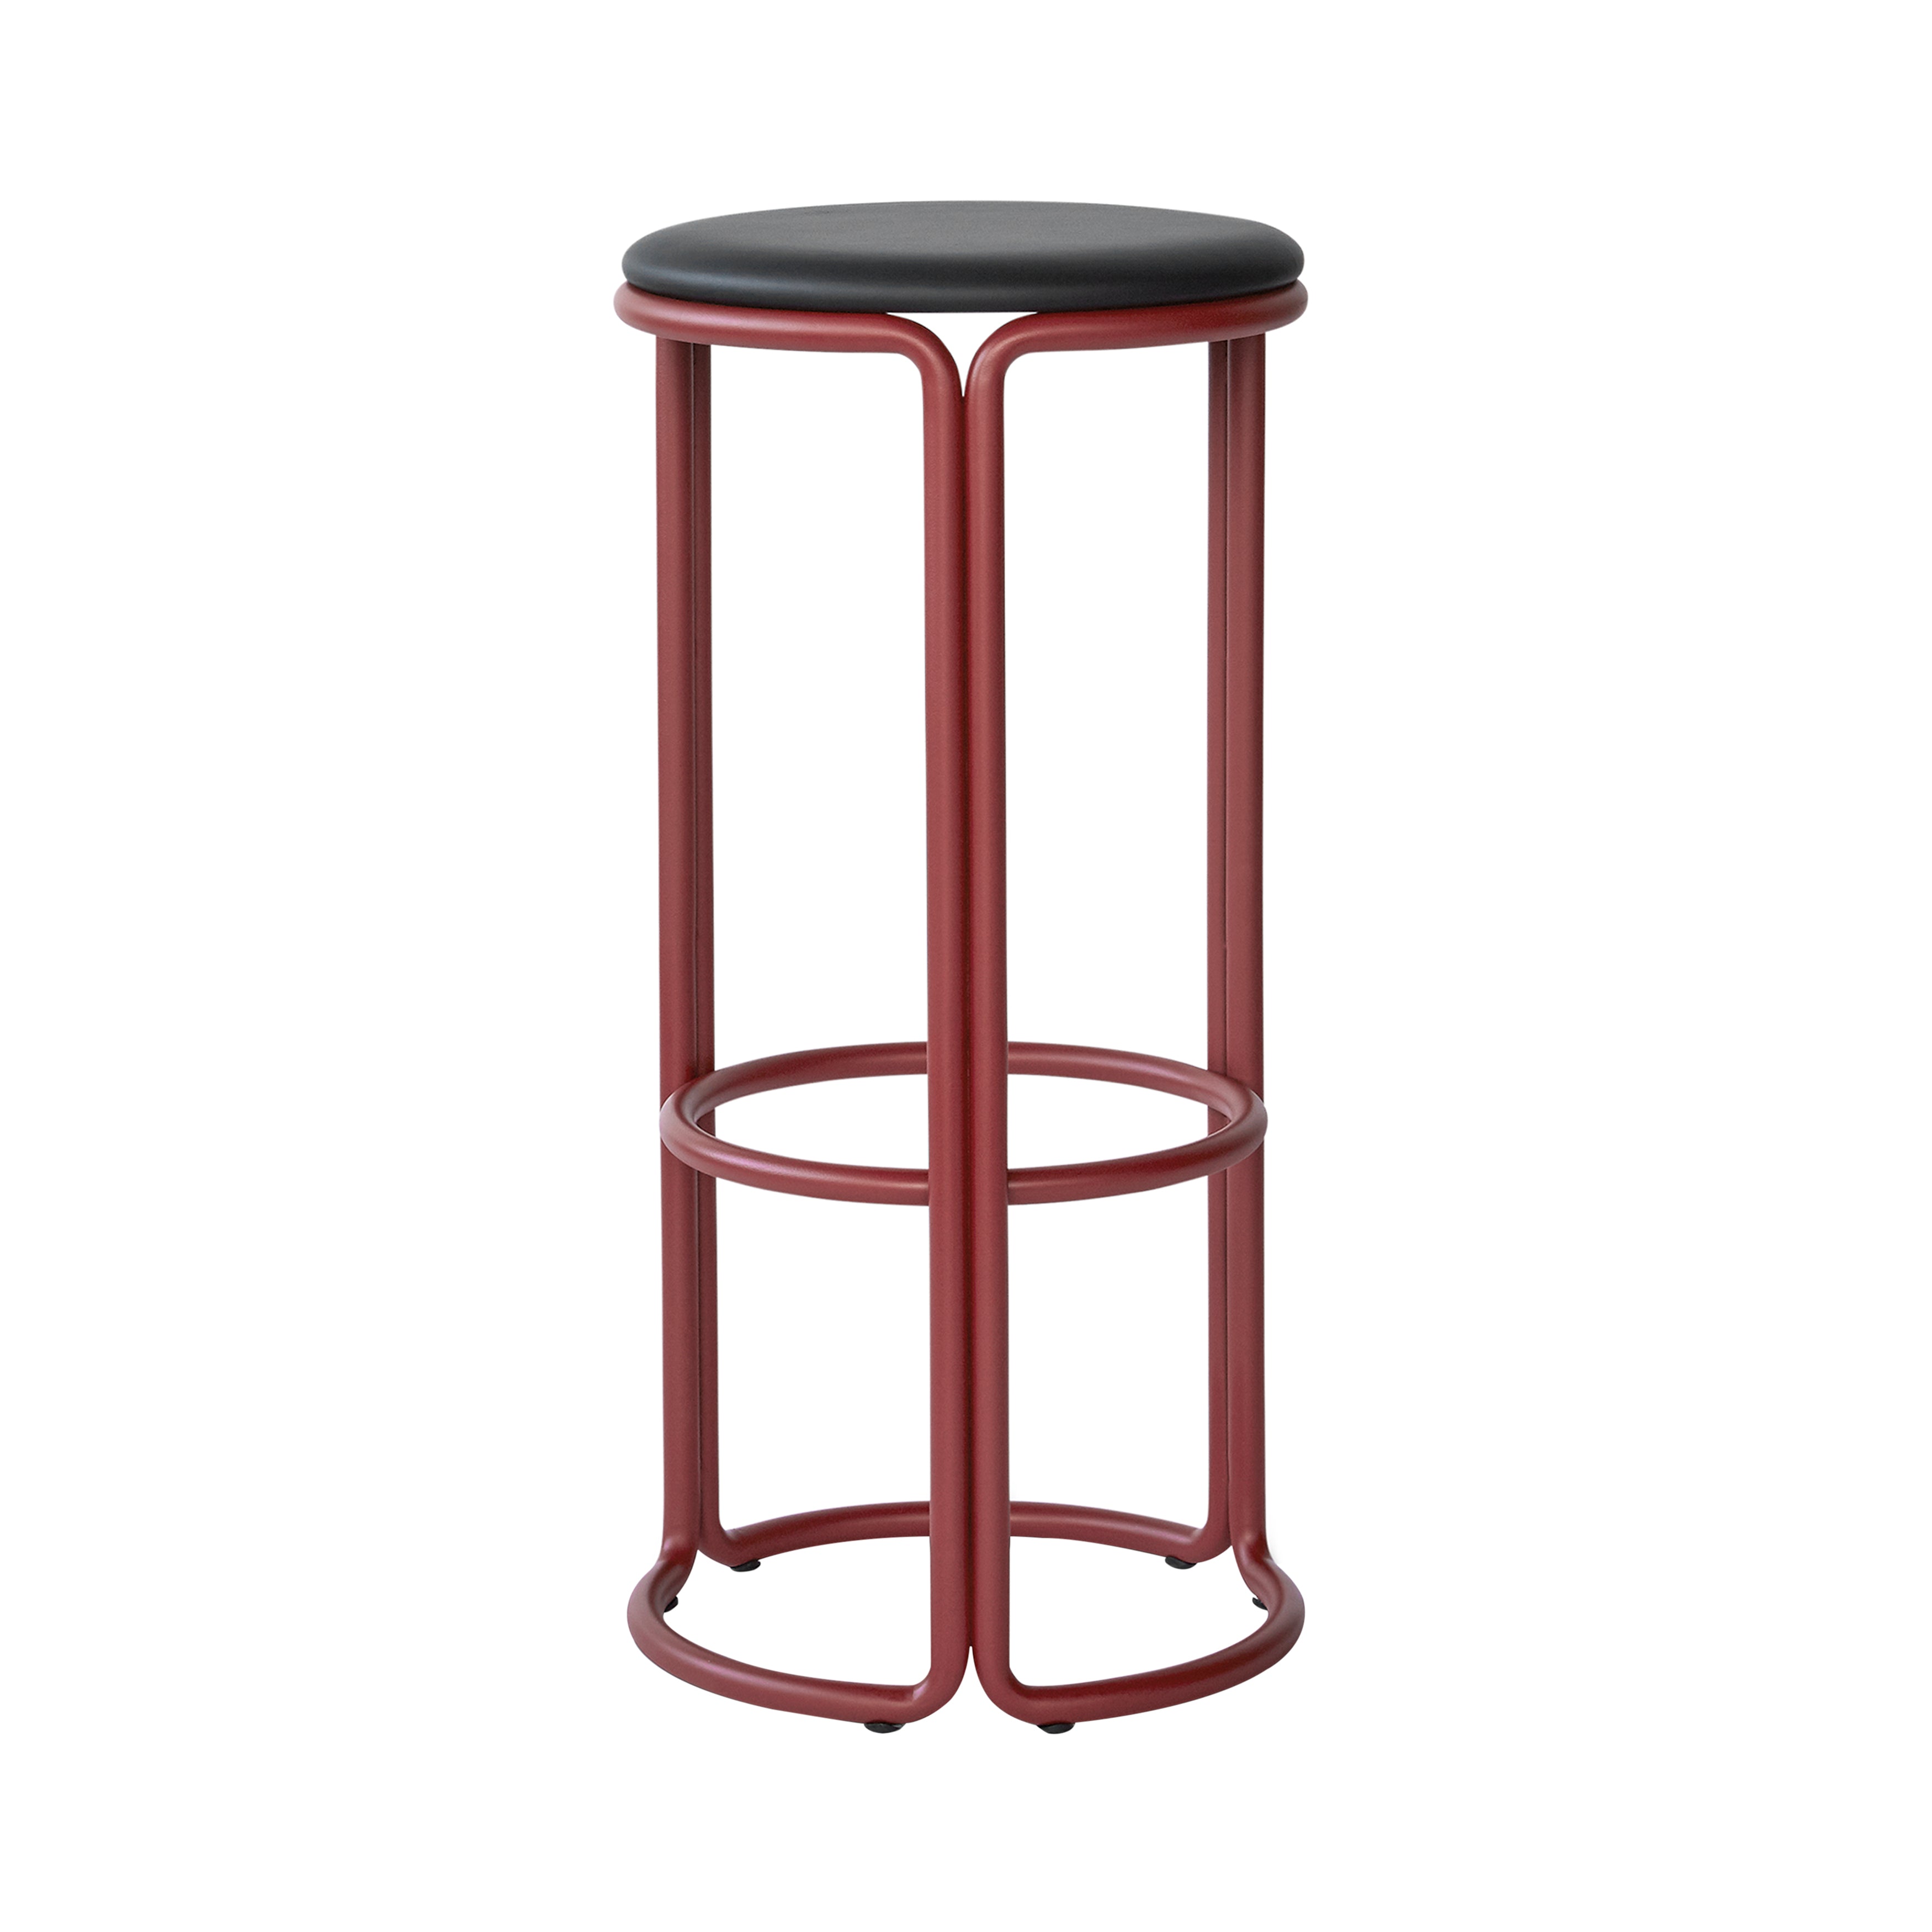 Hardie Bar + Counter Stool: Upholstered + Bar + Basque Red